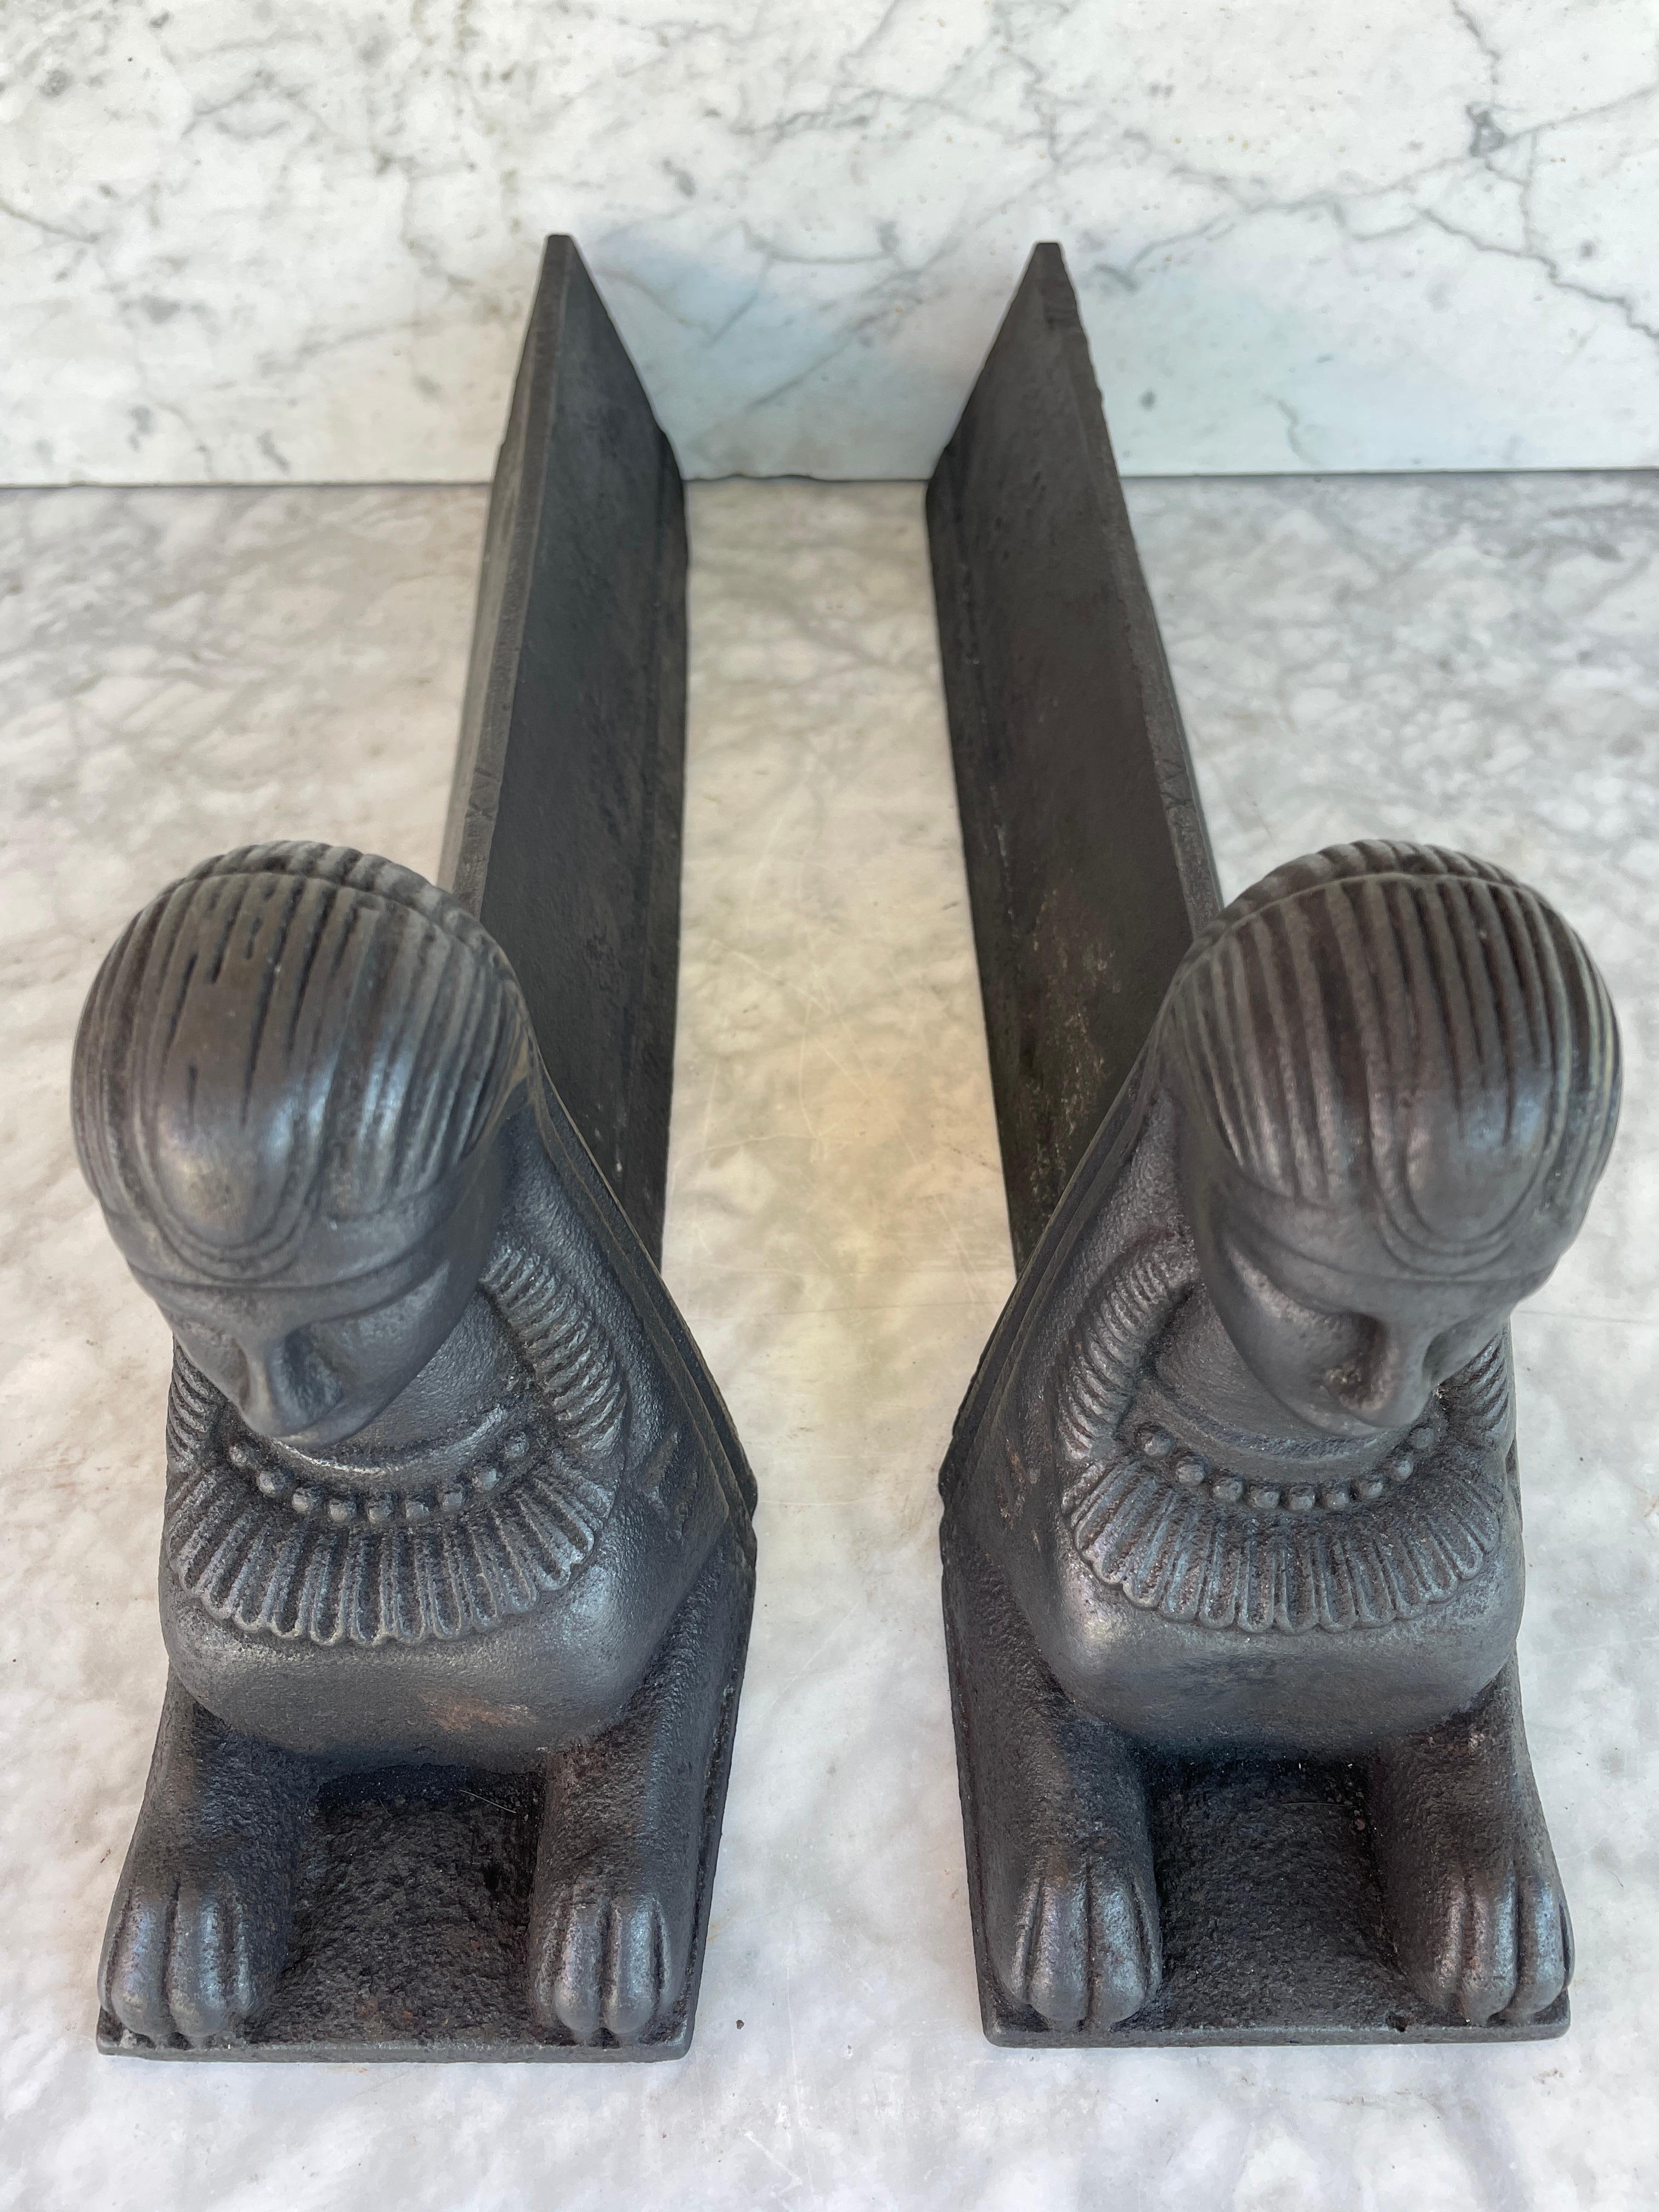 Pair of antique cast iron andirons / firedogs with sphinx.
The pair is in really nice condition.